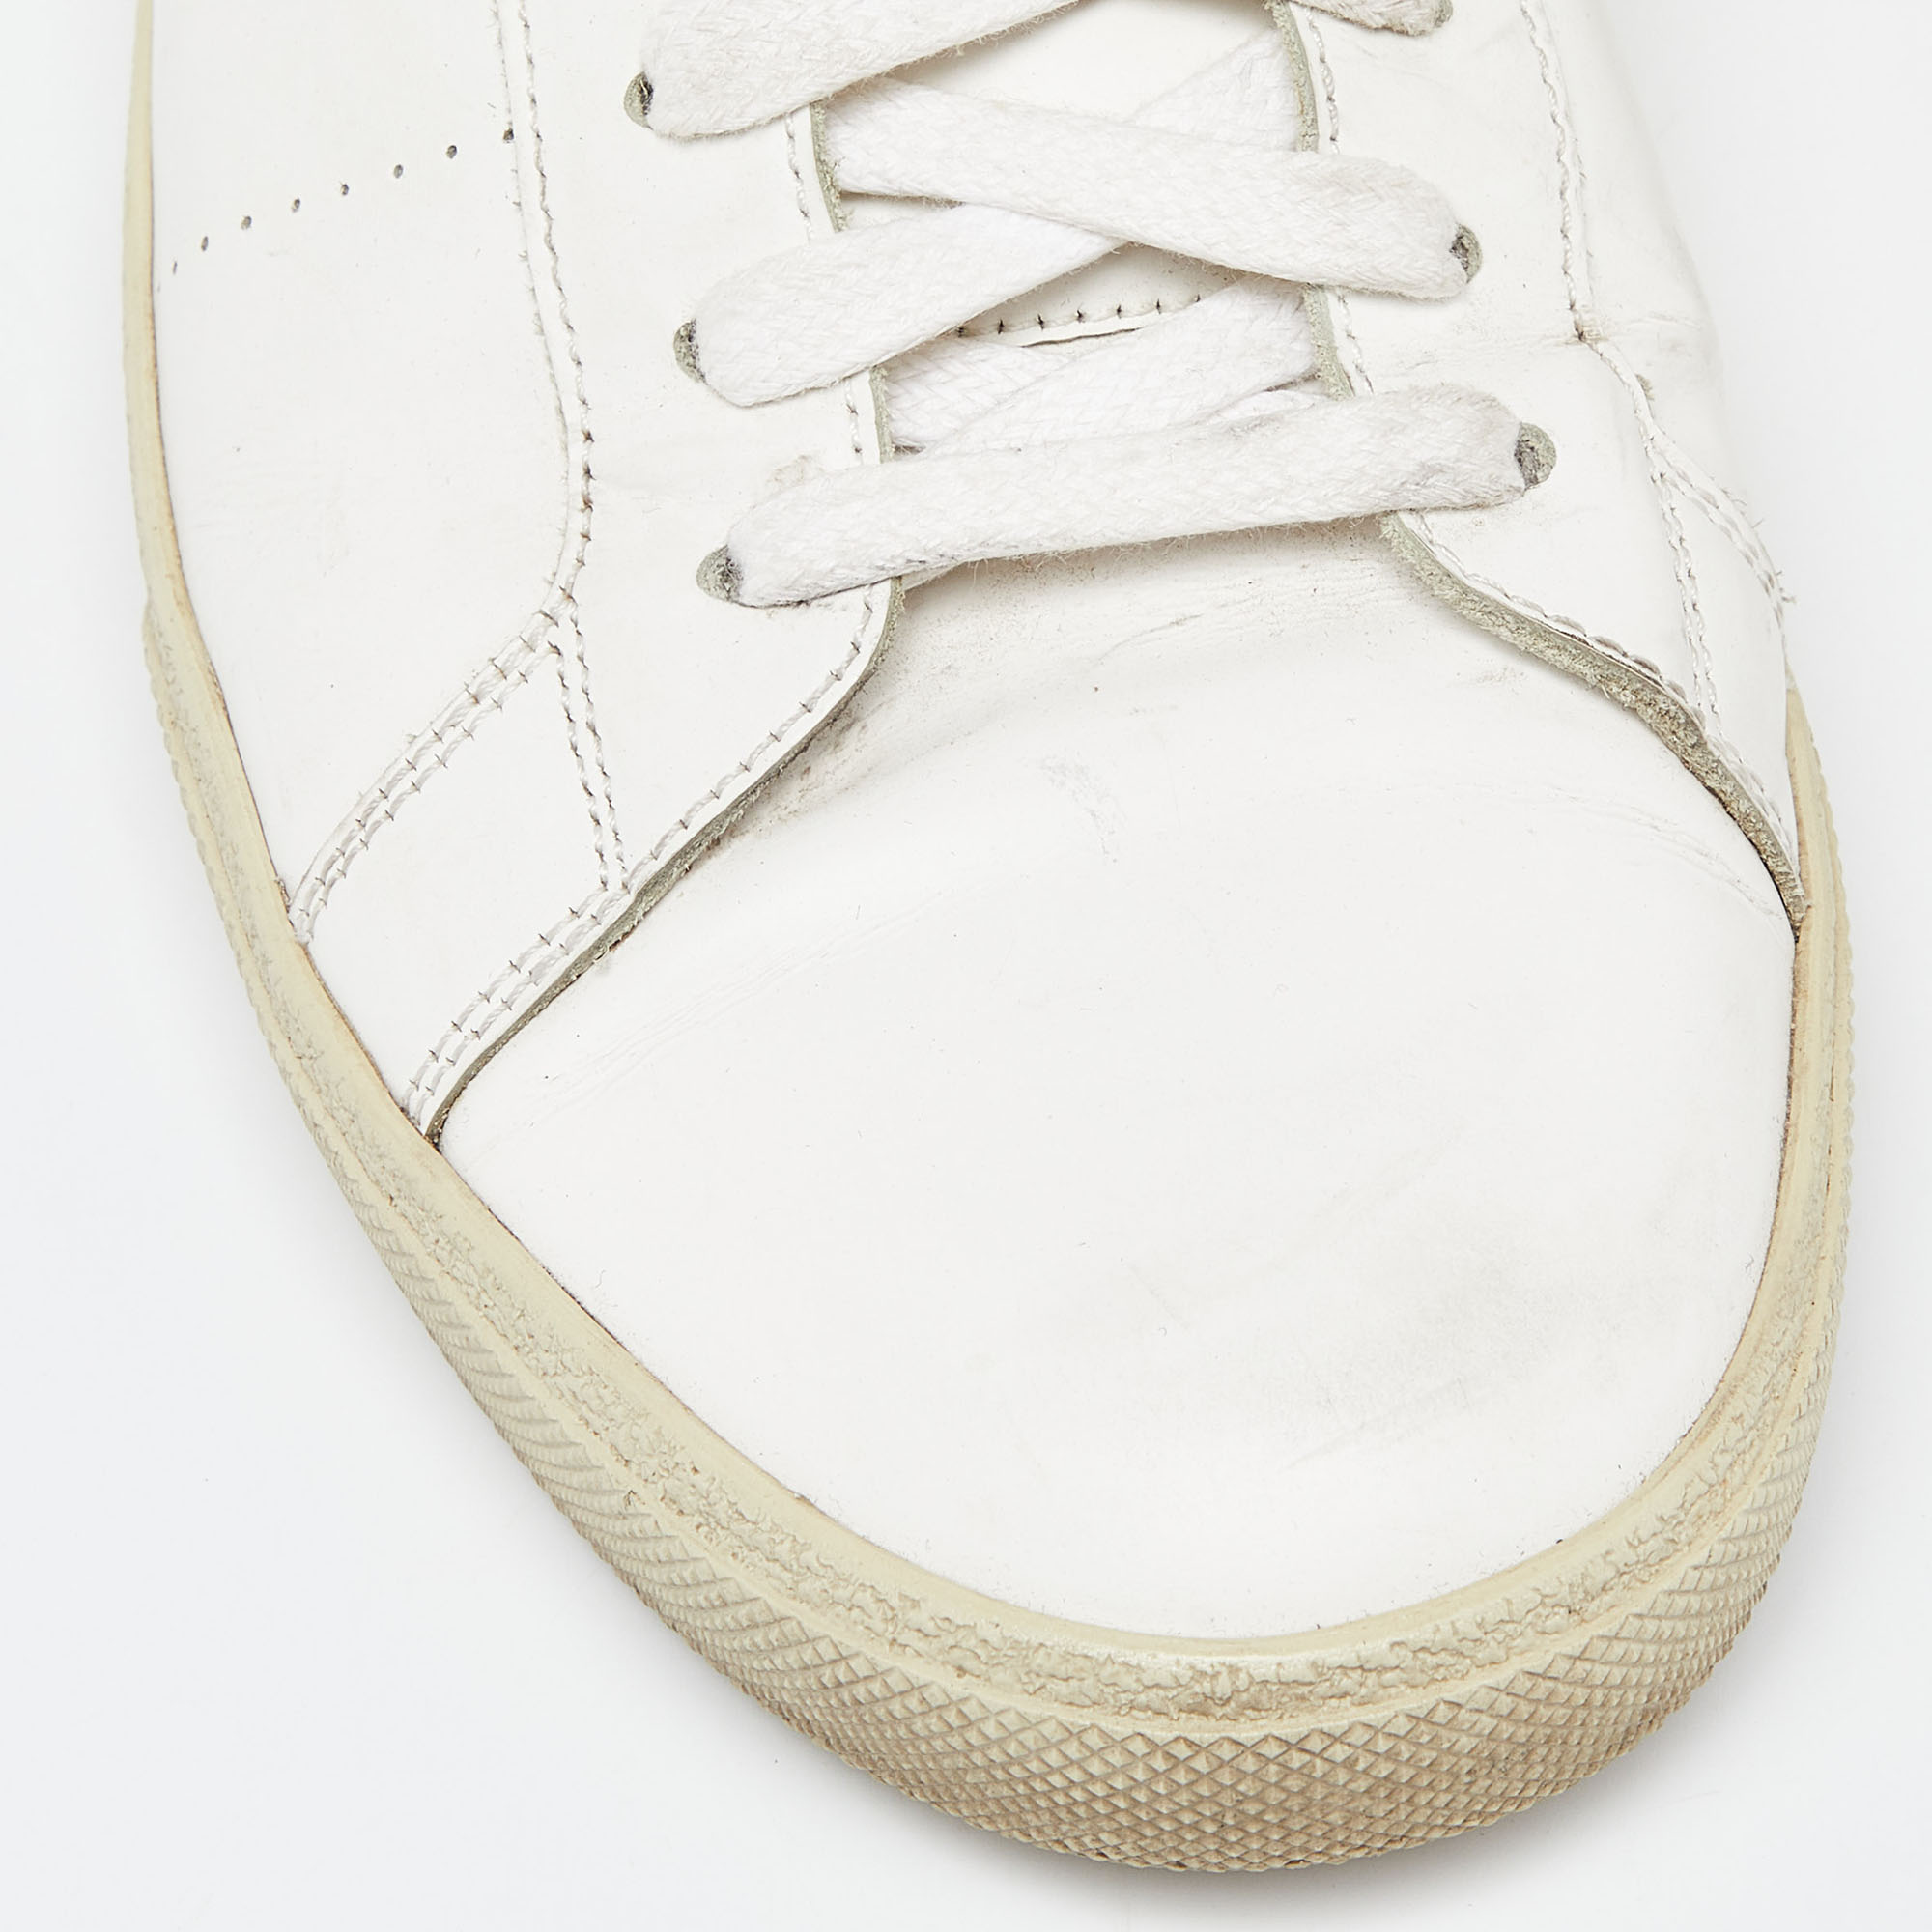 Saint Laurent White Leather Lace Up Sneakers Size 43